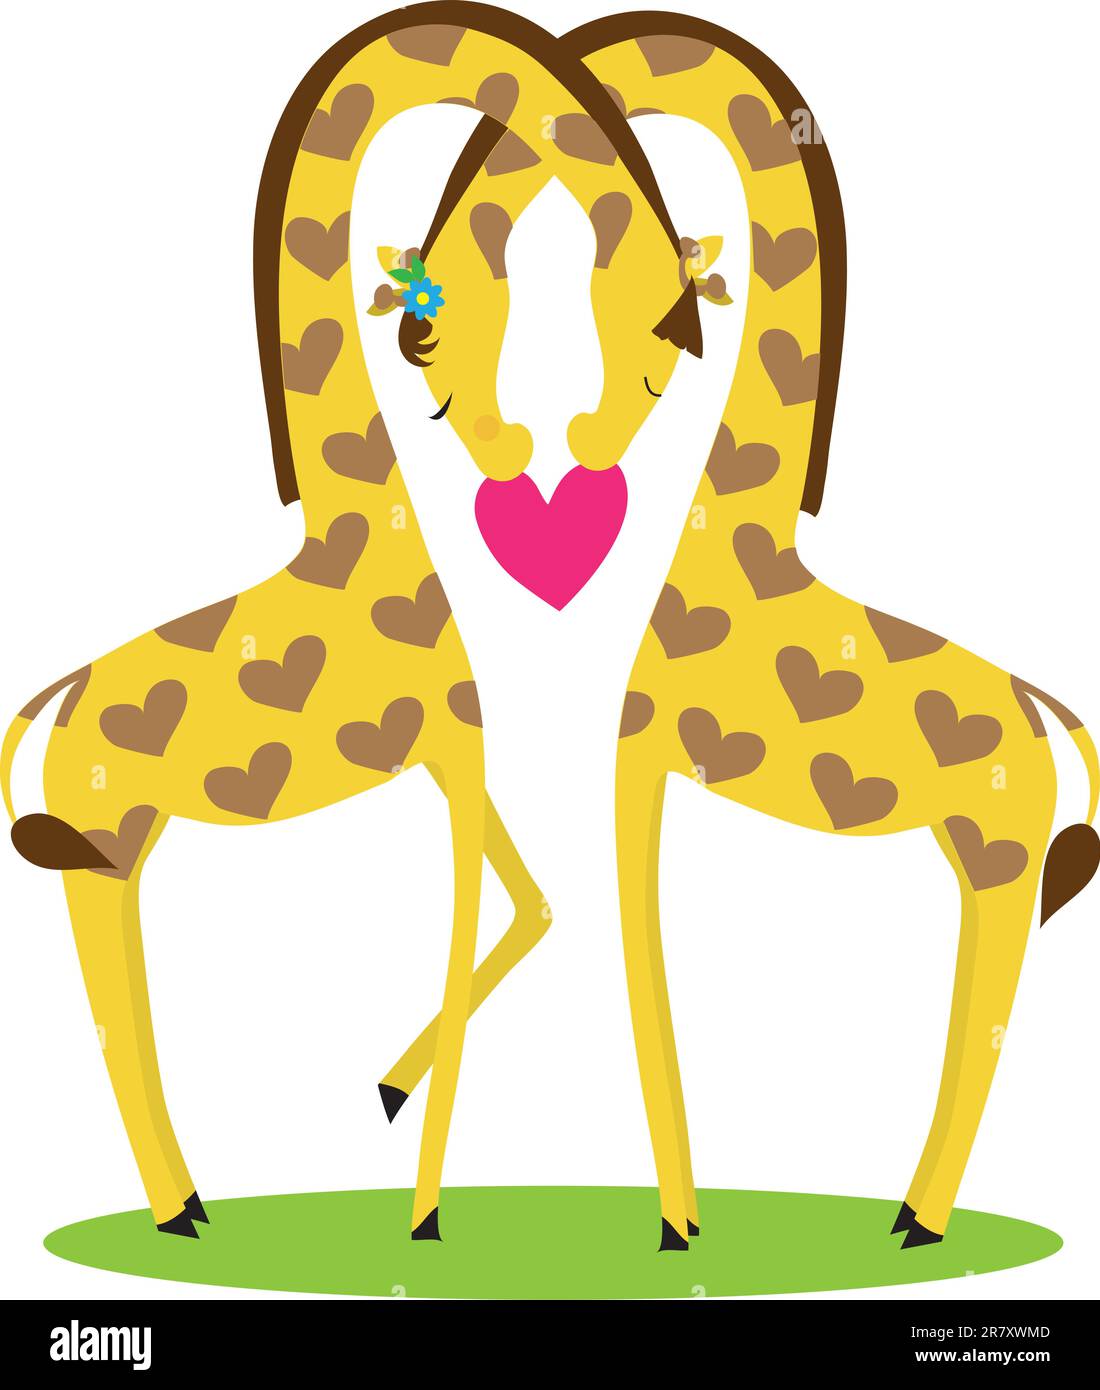 Two giraffes, male and female,  nestled together in the shape of a heart, above a red heart. Stock Vector